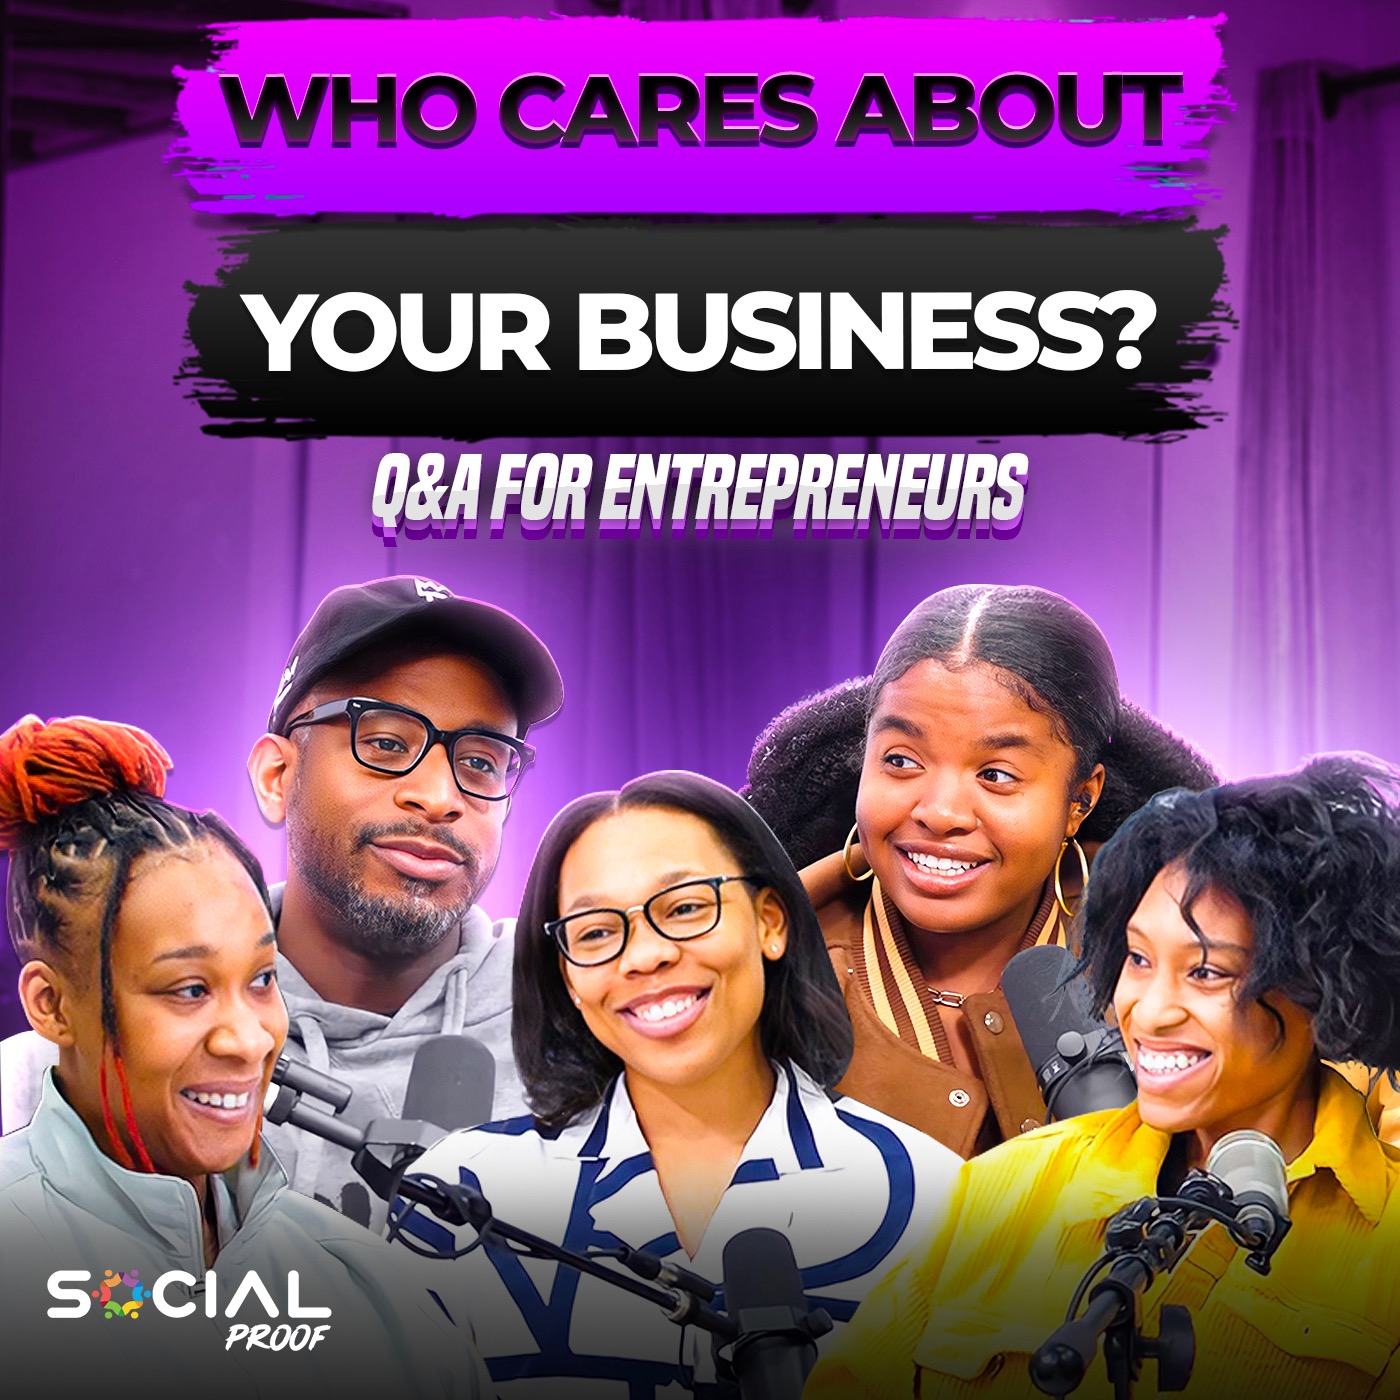 How To Communicate Excitement About Your Business - (ENTREPRENEURS Q&A)